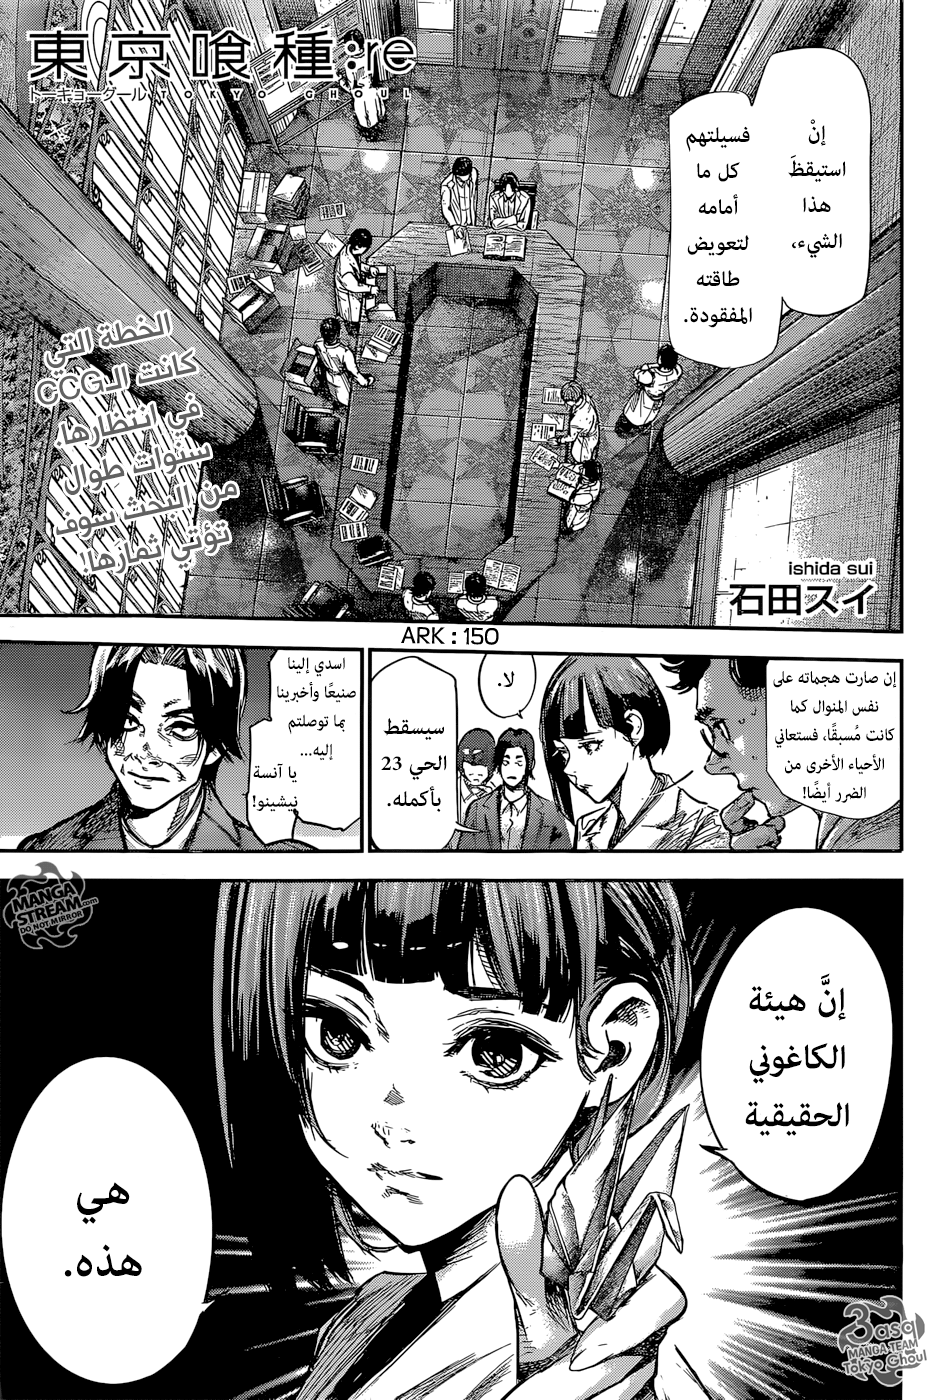 Tokyo Ghoul: Re: Chapter 150 - Page 1